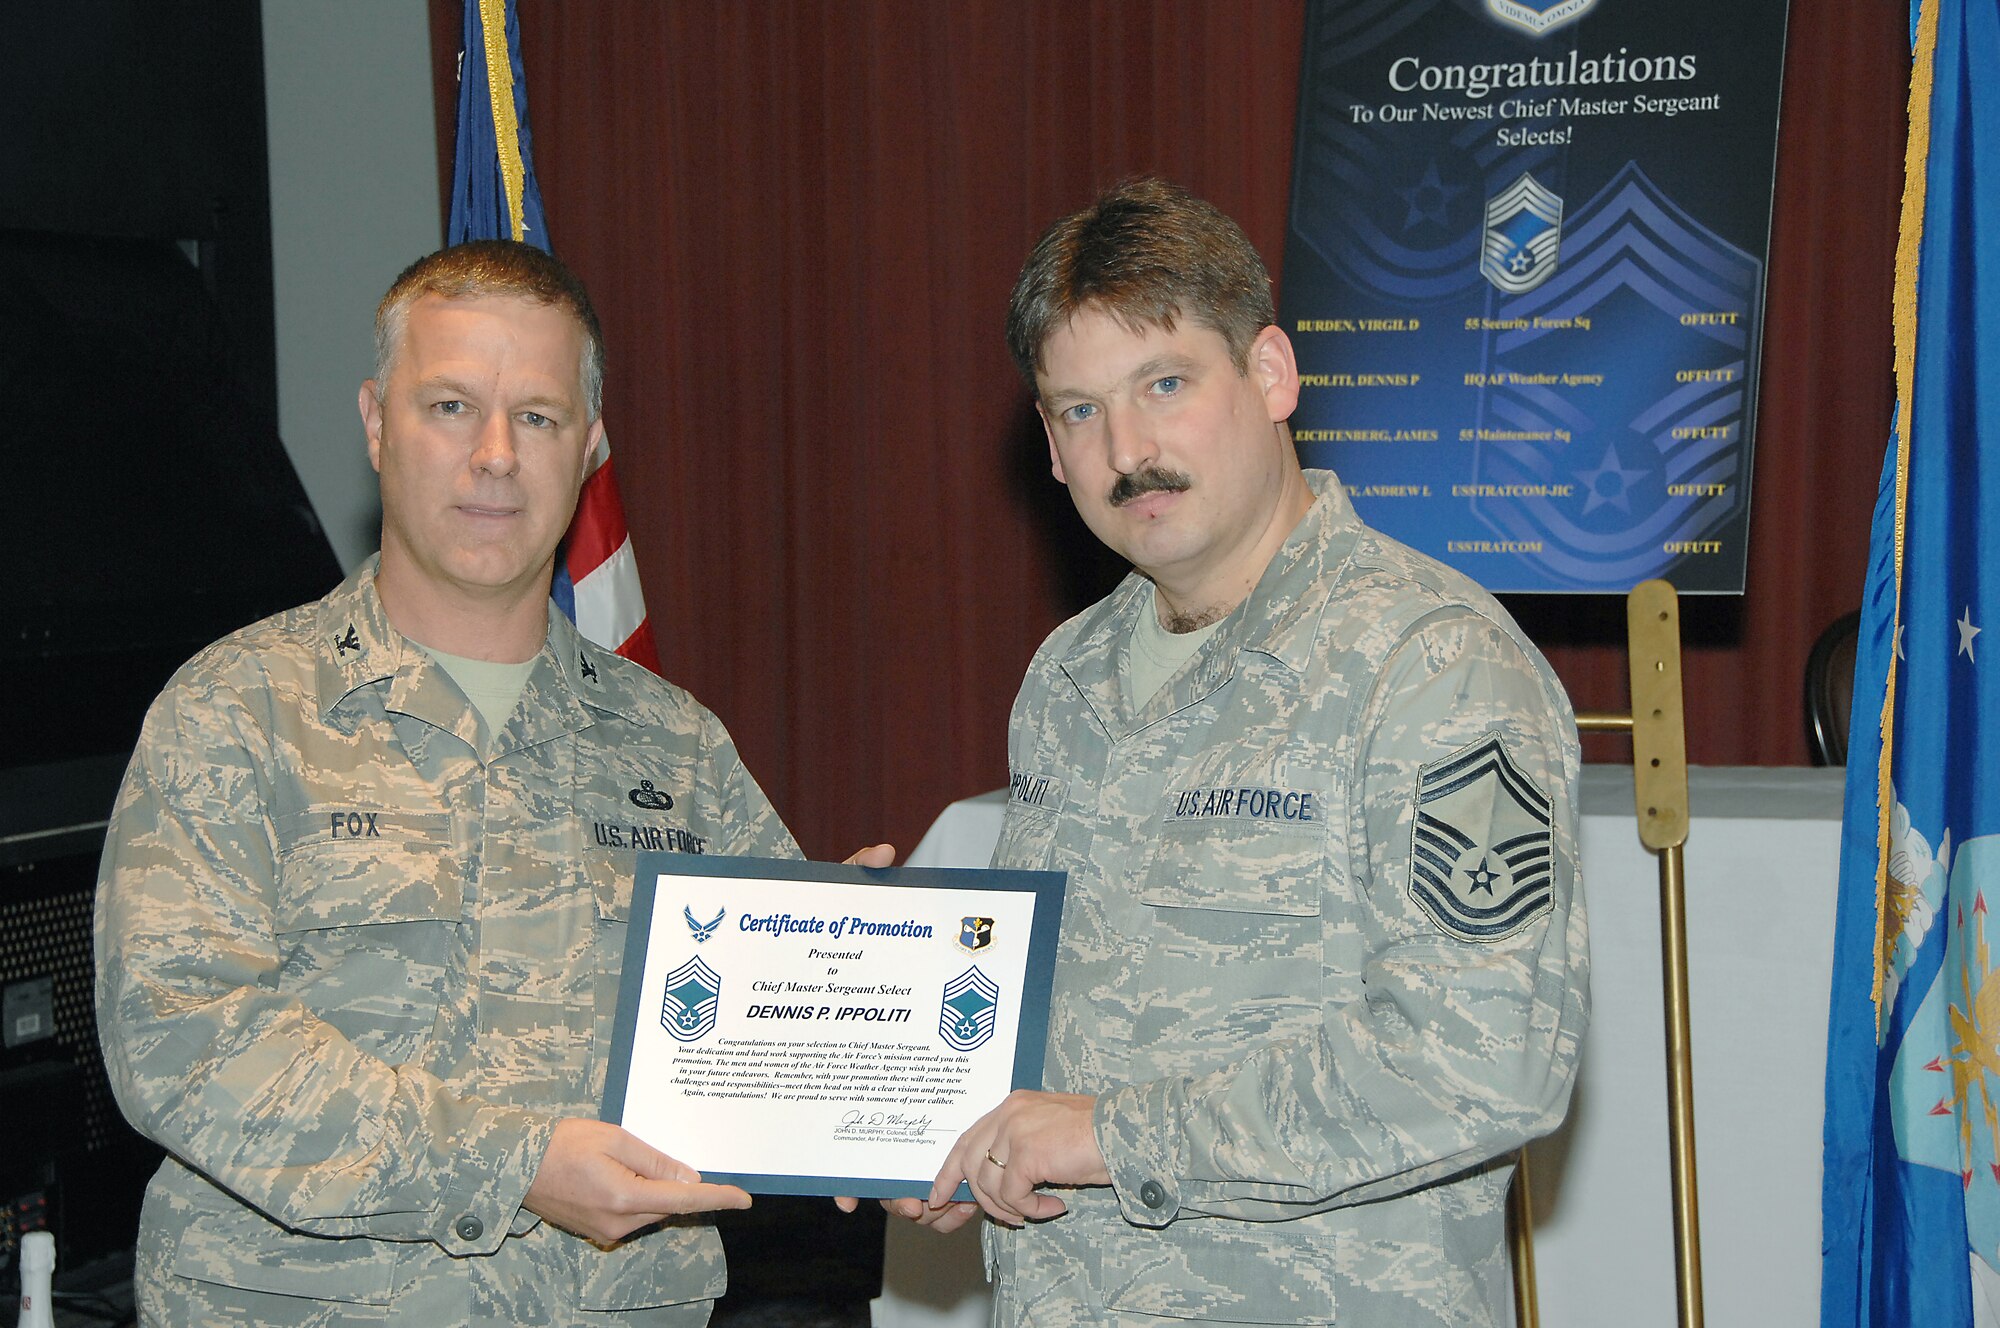 OFFUTT AIR FORCE BASE, Neb. -- Senior Master Sgt. Dennis Ippoliti, Air Force Weather Agency, receives his Certificate of Promotion from Col. Kurt Fox, Air Force Weather Agency, during the chief's promption at the Patriot Club, Nov. 14. The rank of chief master sgt. is only attained by the top one percent of the Air Force's enlisted corps.  (U.S. Air Force Photo By Dana Heard)